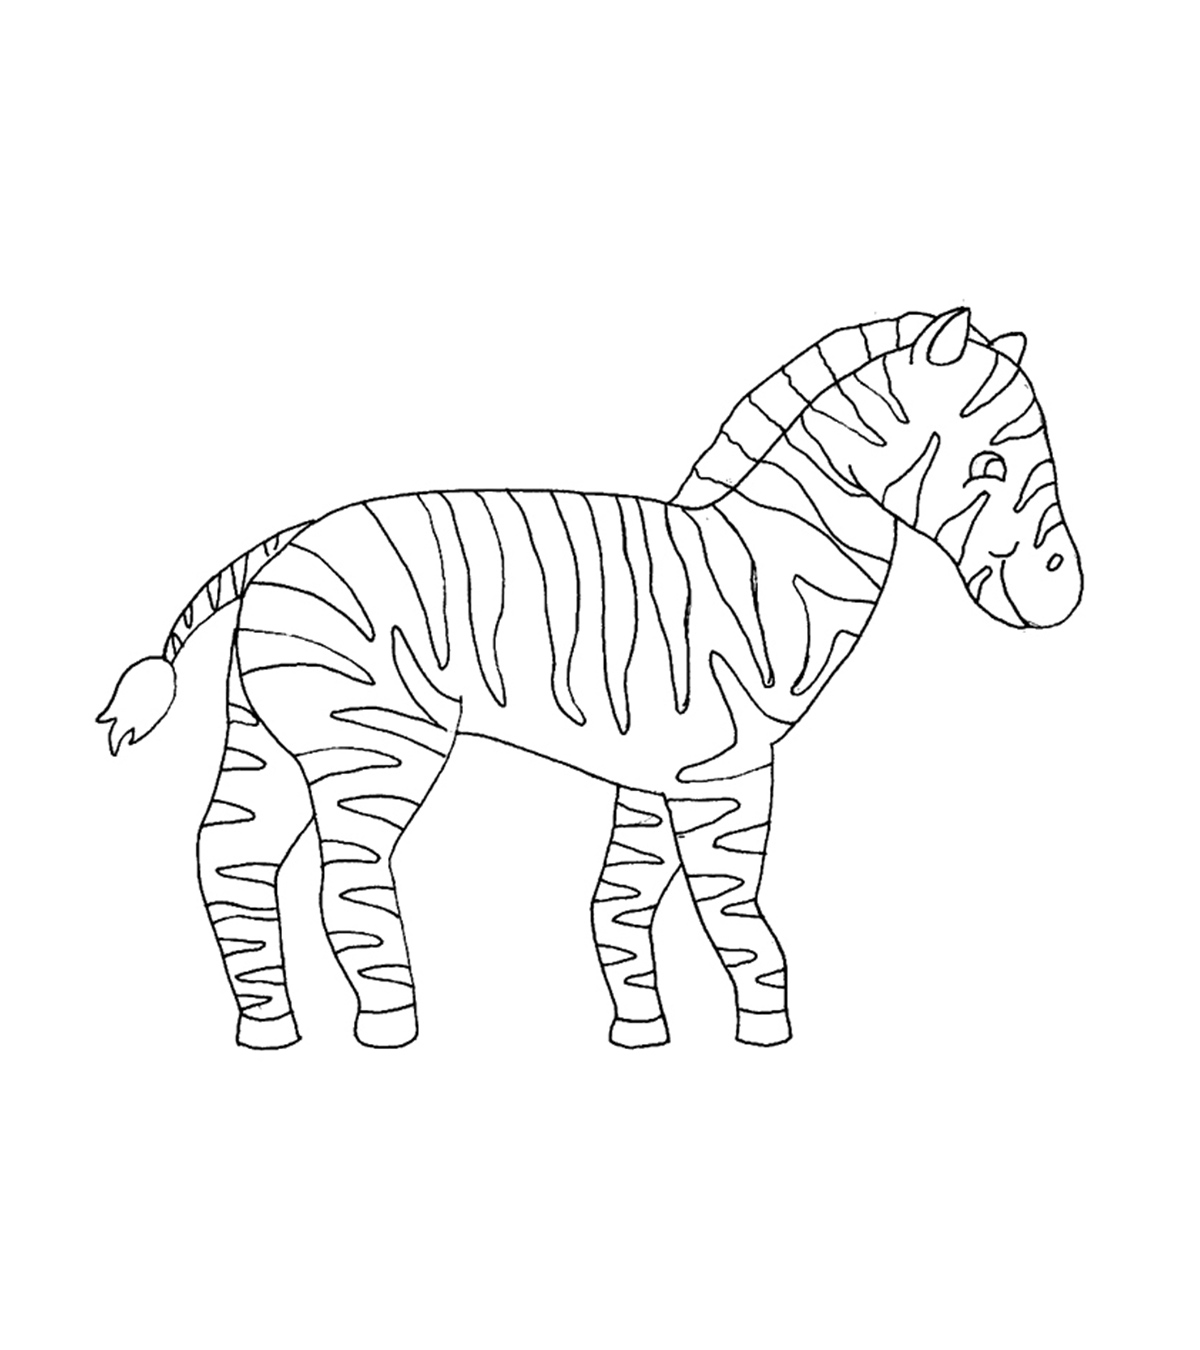 Top 20 Zebra Coloring Pages Your Toddler Will Love To Color_image